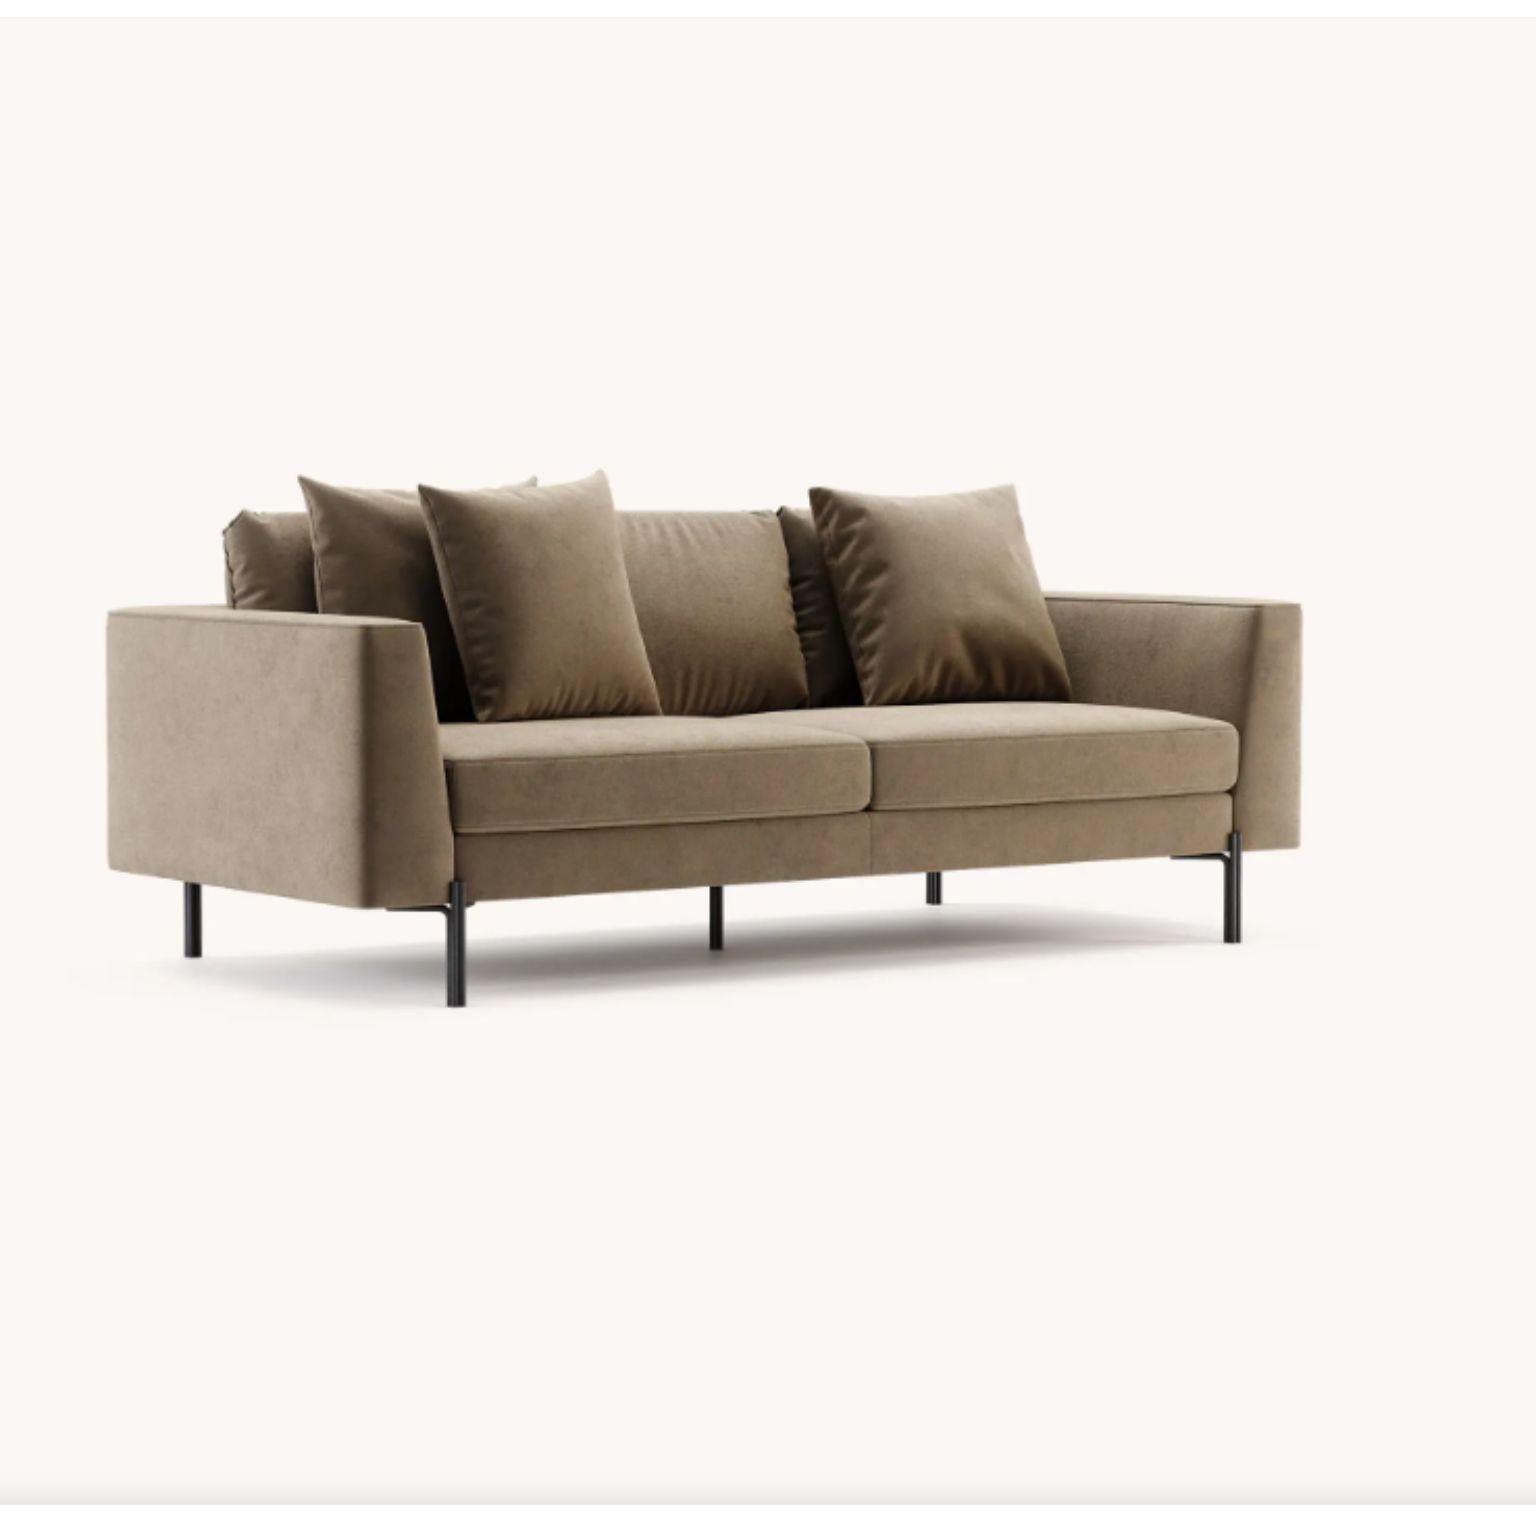 Nicole 3 Seats Sofa by Domkapa
Materials: Velvet (Neva 2206), black texturized steel. 
Dimensions: W 230 x D 105 x H 90 cm.
Also available in different materials. Please contact us.

A British-inspired design is what best defines Nicole sofa.